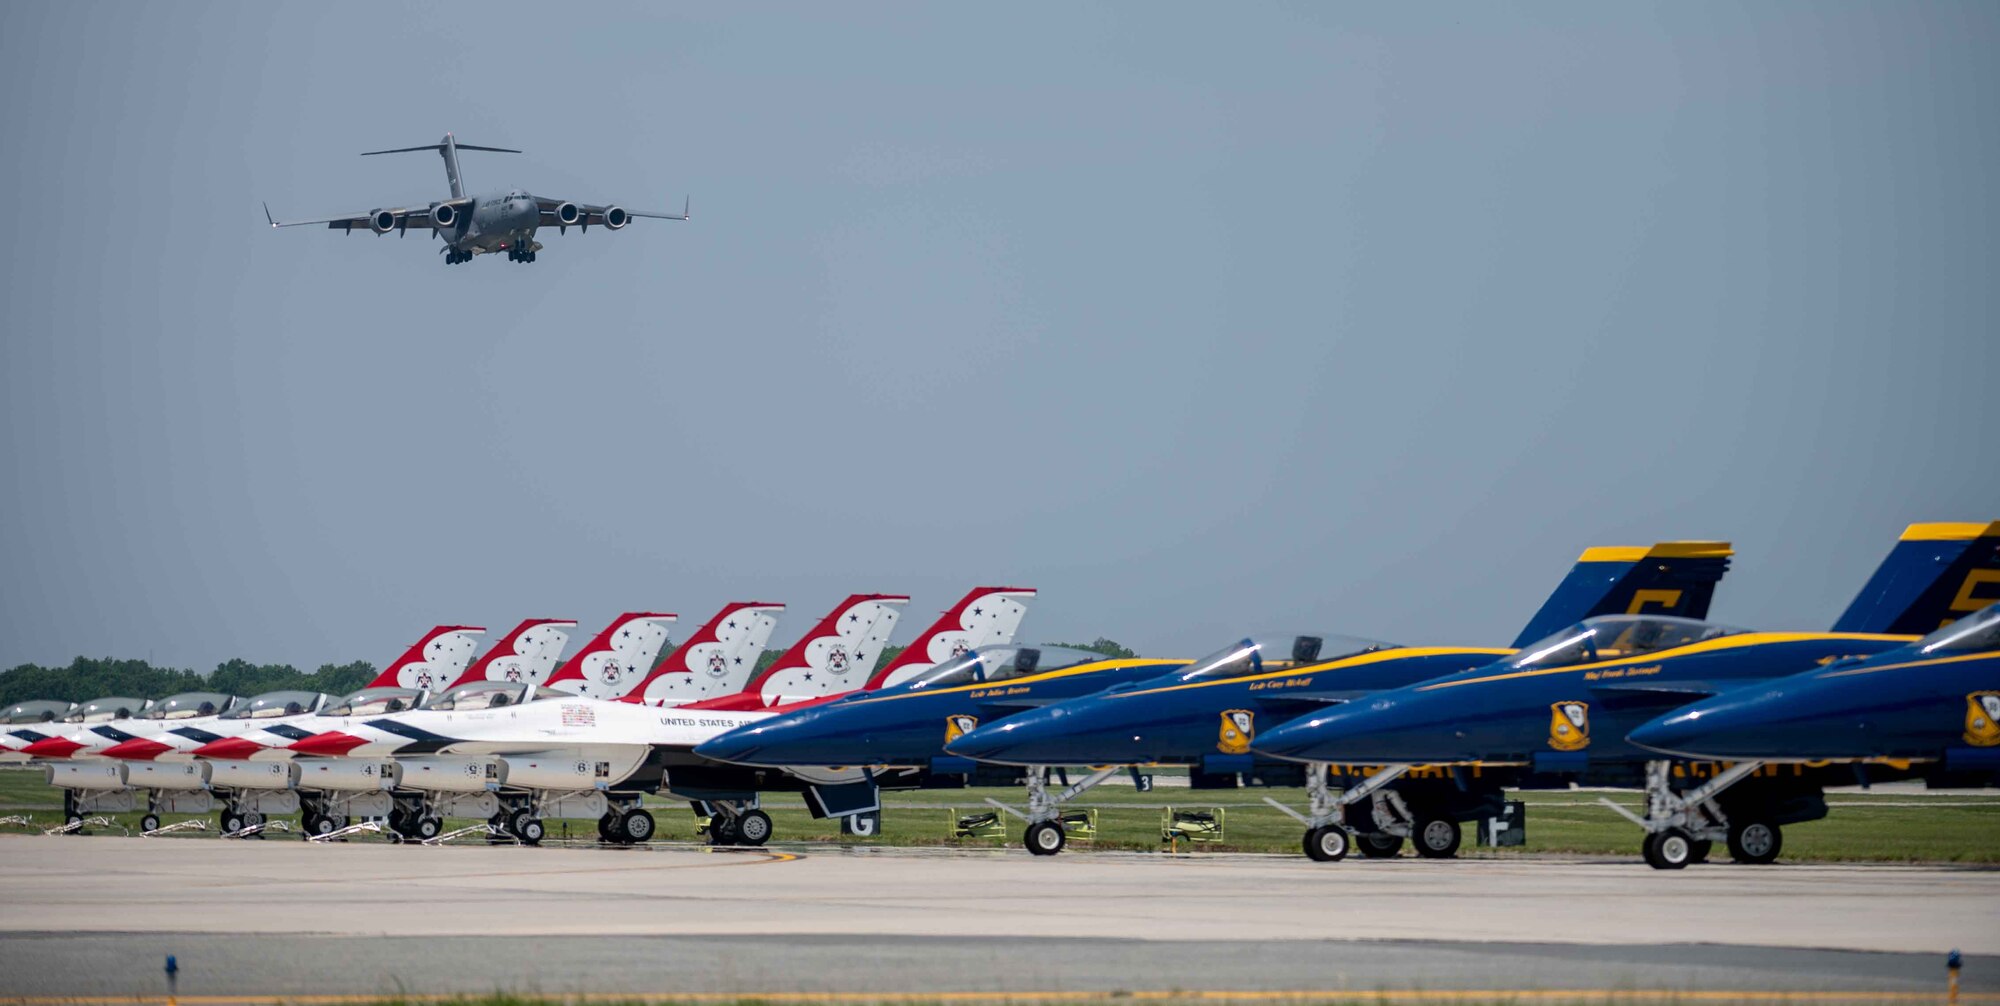 A U.S. Air Force C-17 Globemaster III flies over the U.S. Navy Blue Angels and the U.S. Air Force Thunderbirds, during the first day of the 2022 Thunder Over Dover Airshow, May 21, 2022, at Dover Air Force Base, Delaware. The airshow’s theme was “Reunite,” in celebration of people coming together after the COVID-19 pandemic. (U.S. Air Force photo by Senior Airman Faith Schaefer)